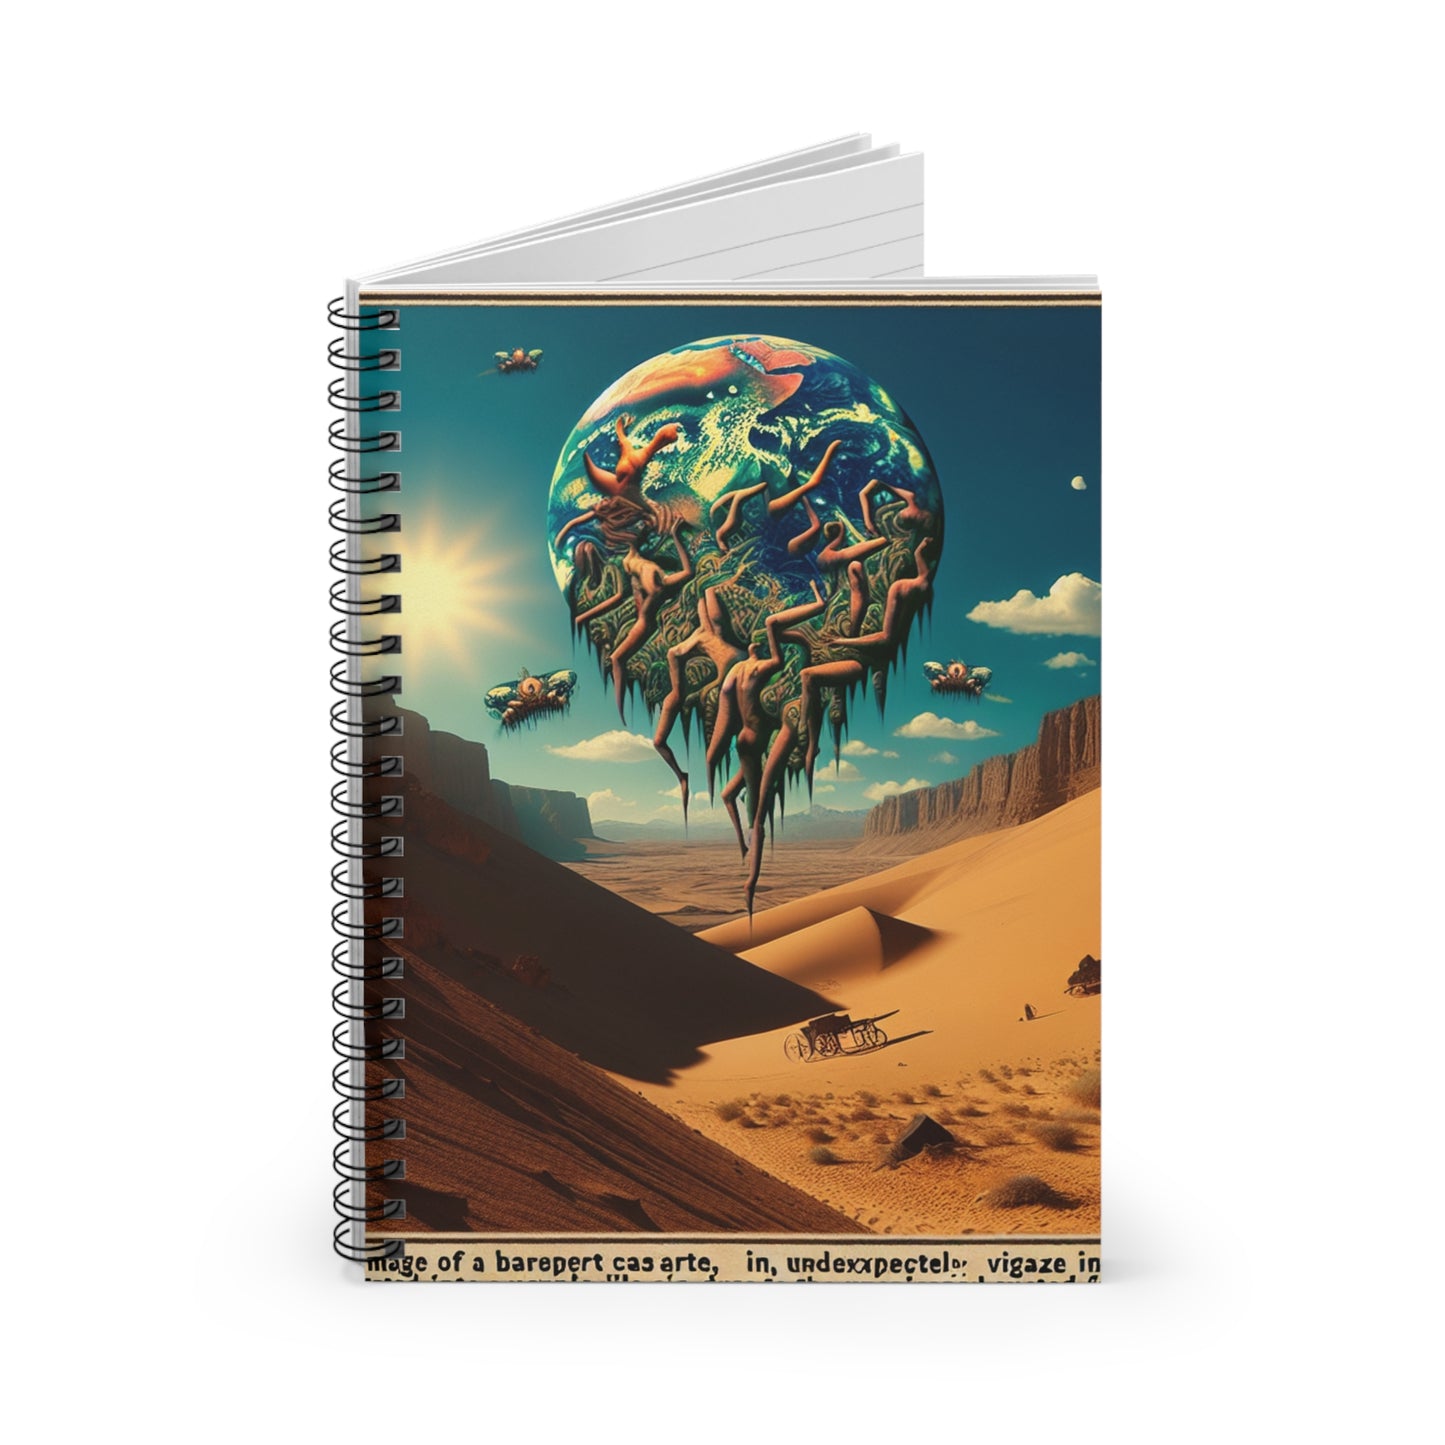 "Uprising in the Outback" - The Alien Spiral Notebook (Ruled Line) Surrealism Style